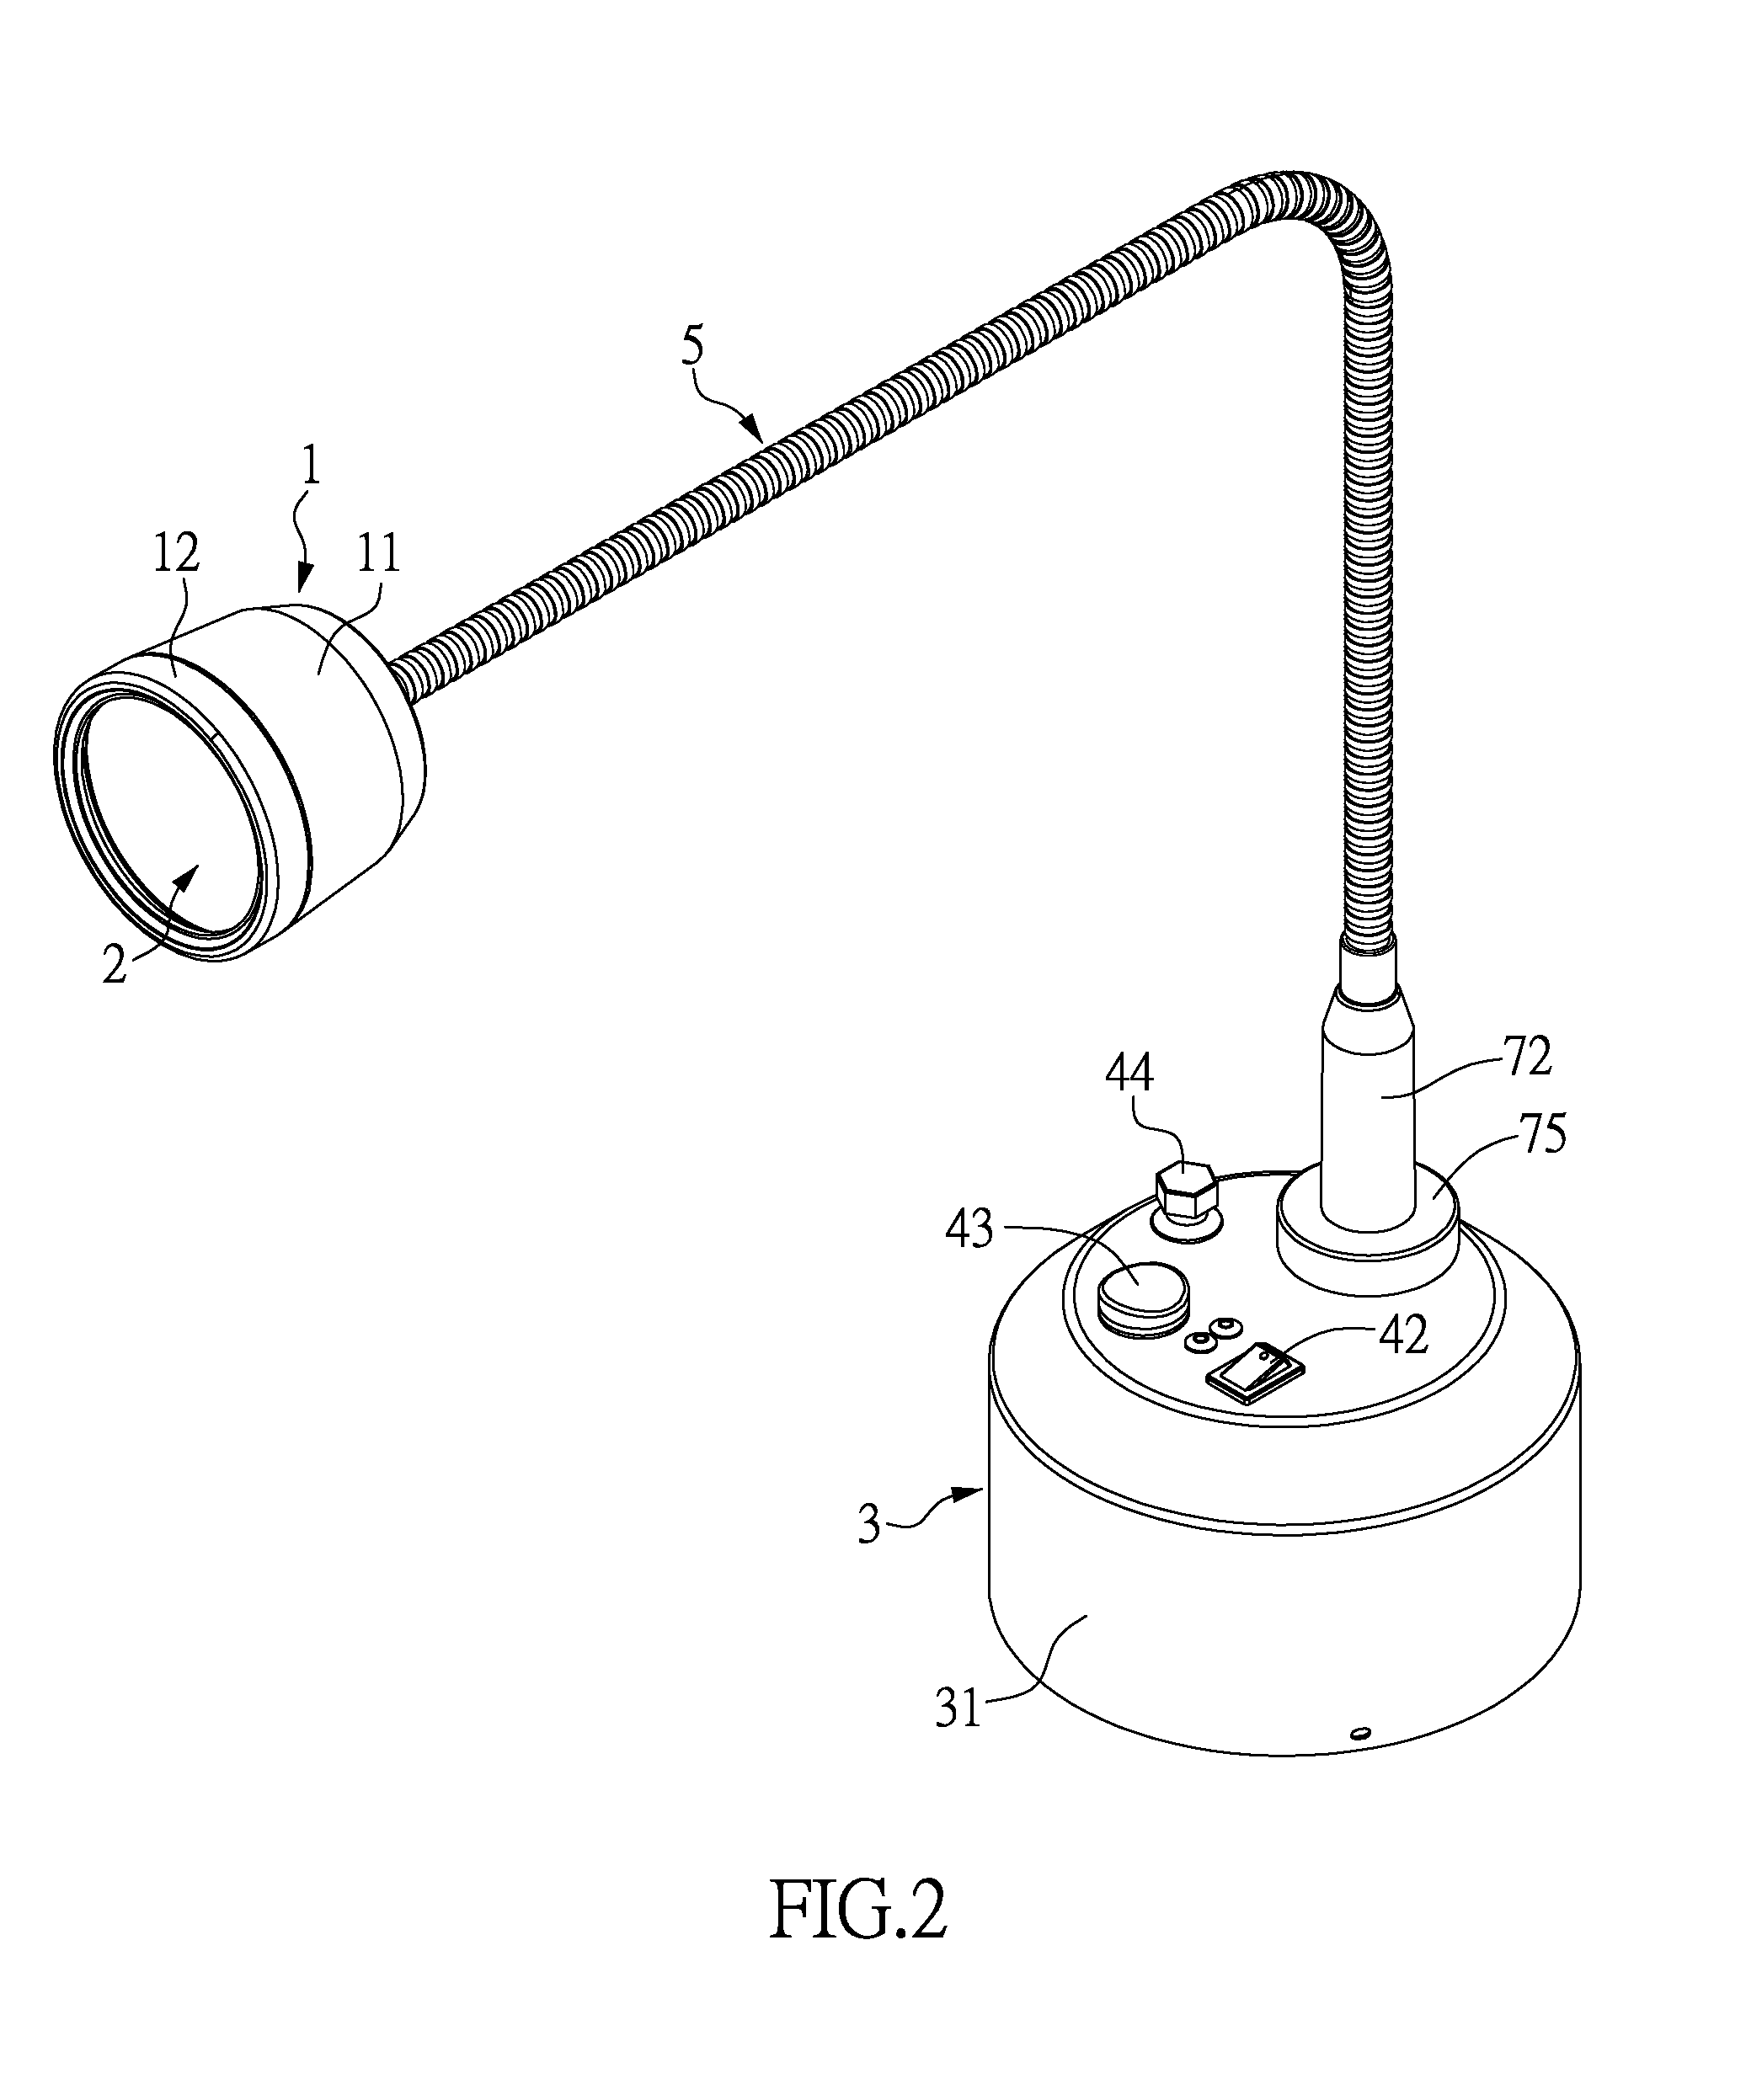 Device for increasing energy at acupuncture points